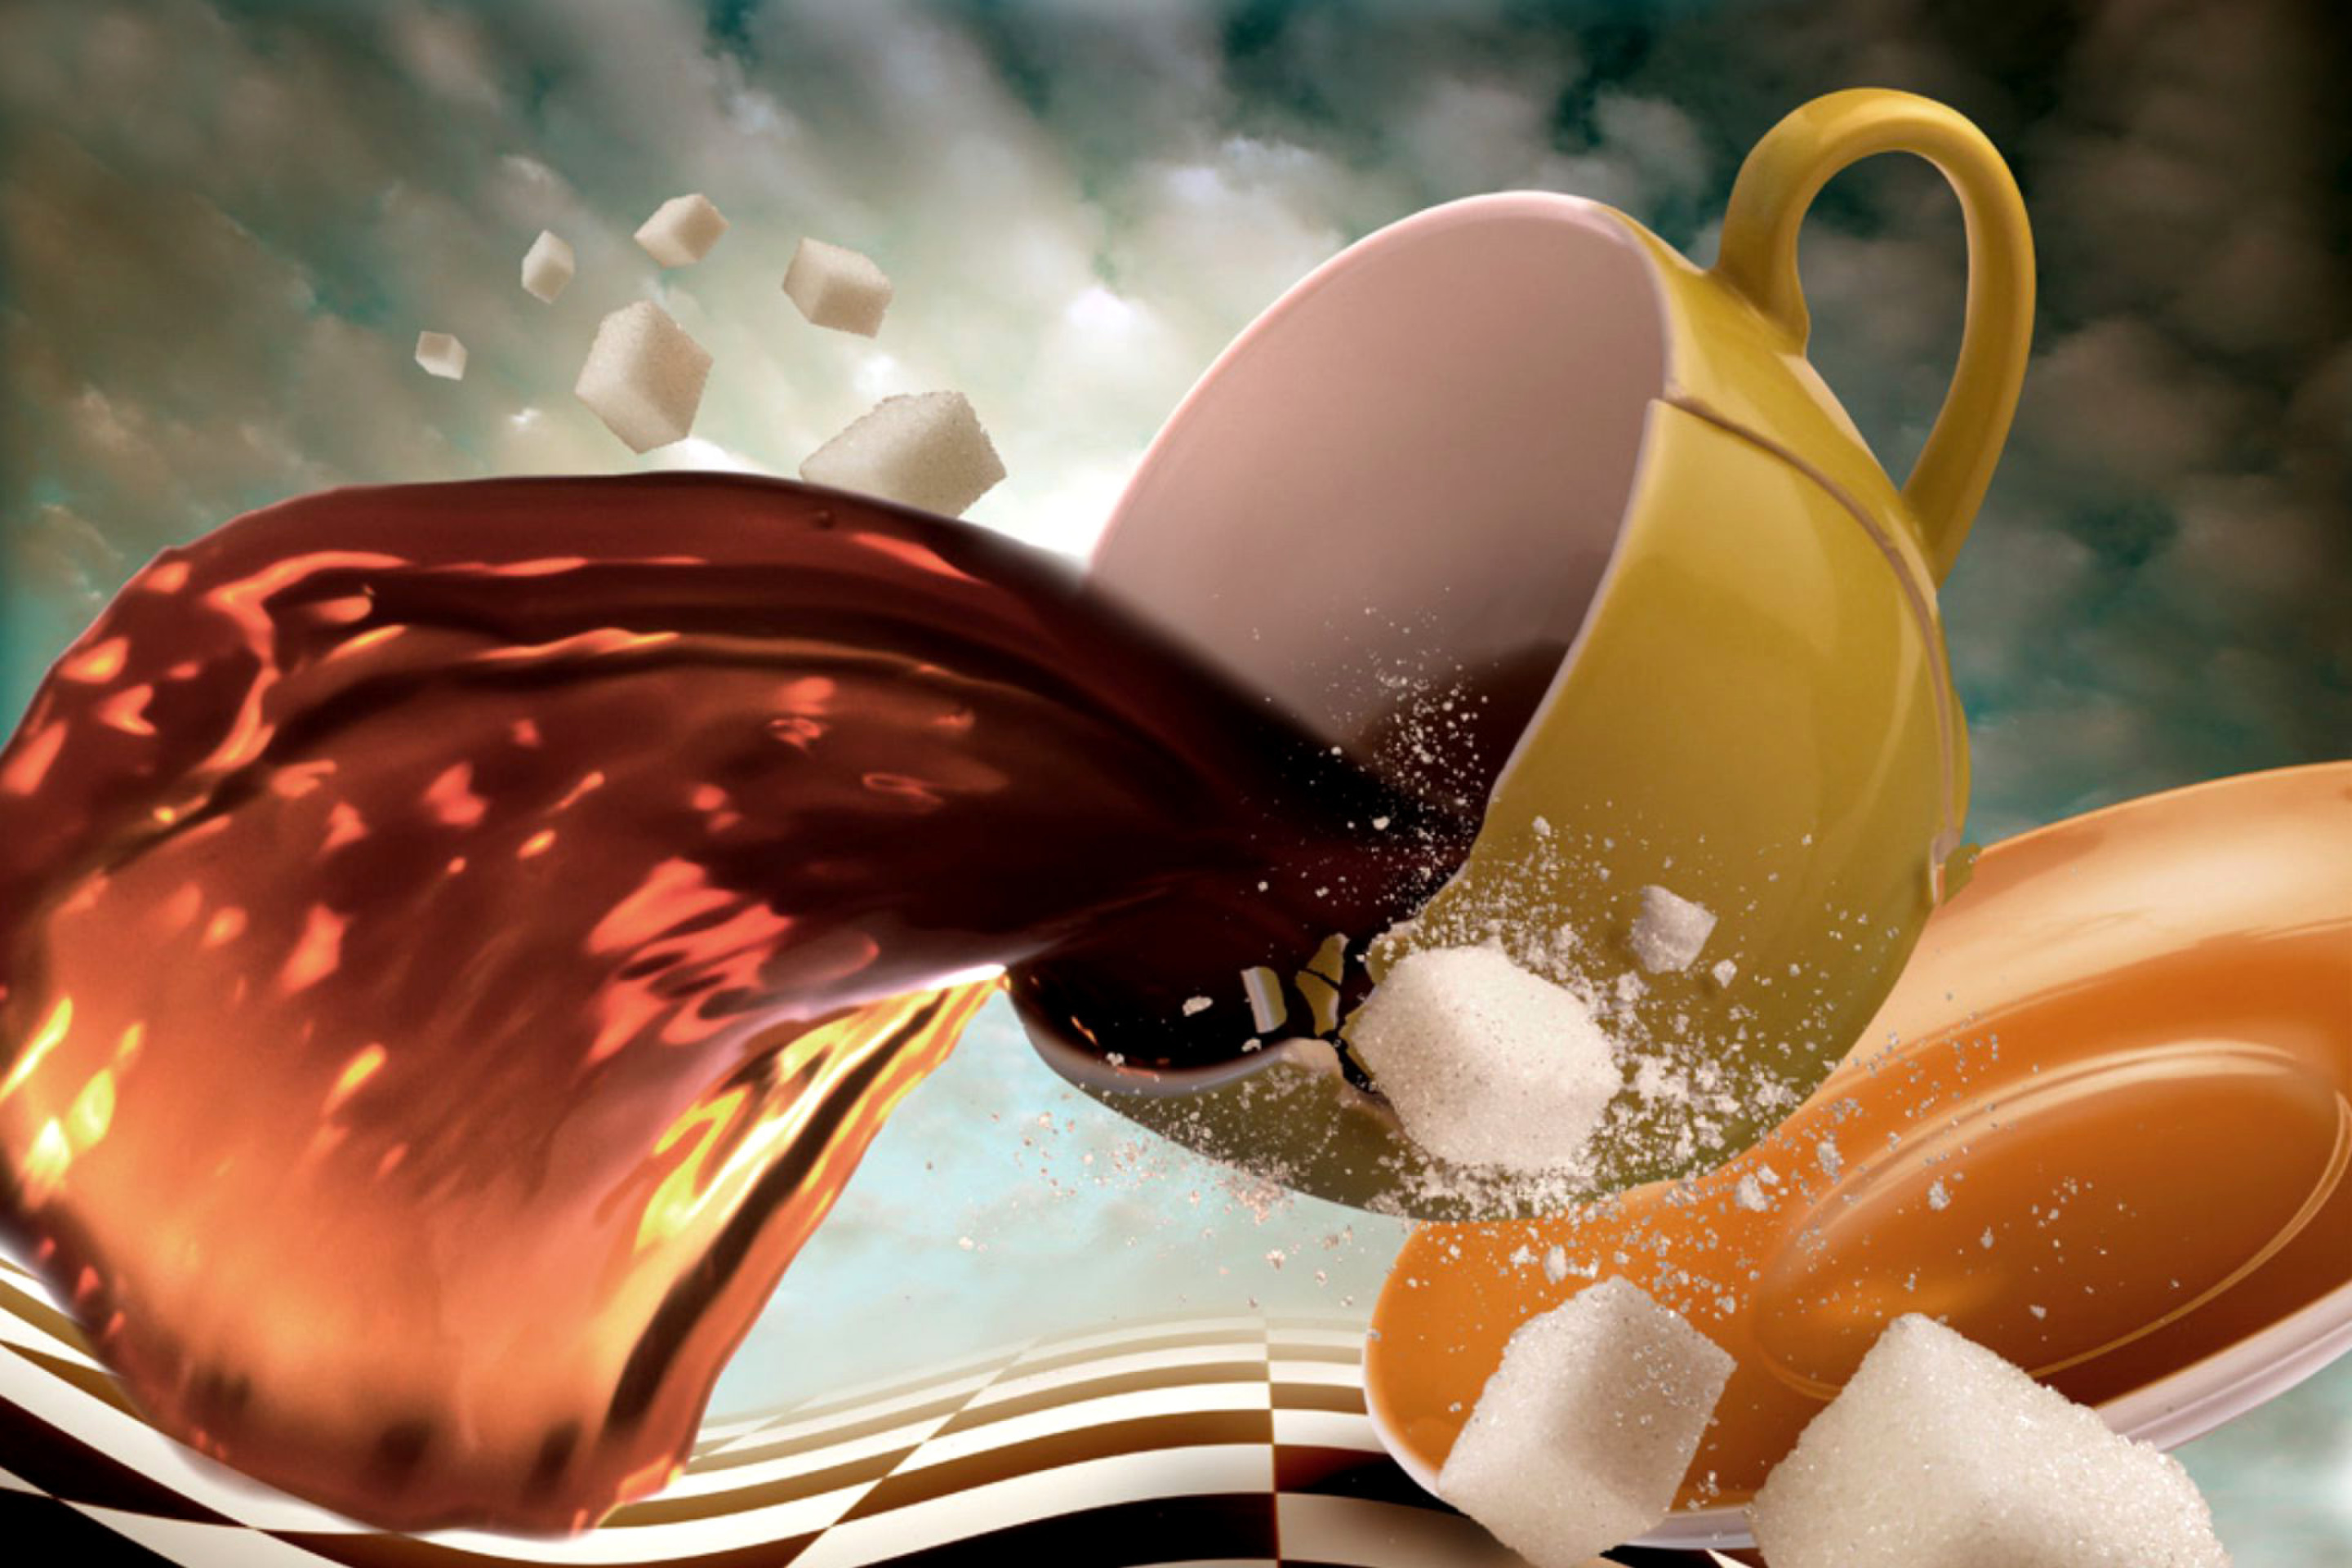 Surrealism Coffee Cup with Sugar cubes wallpaper 2880x1920